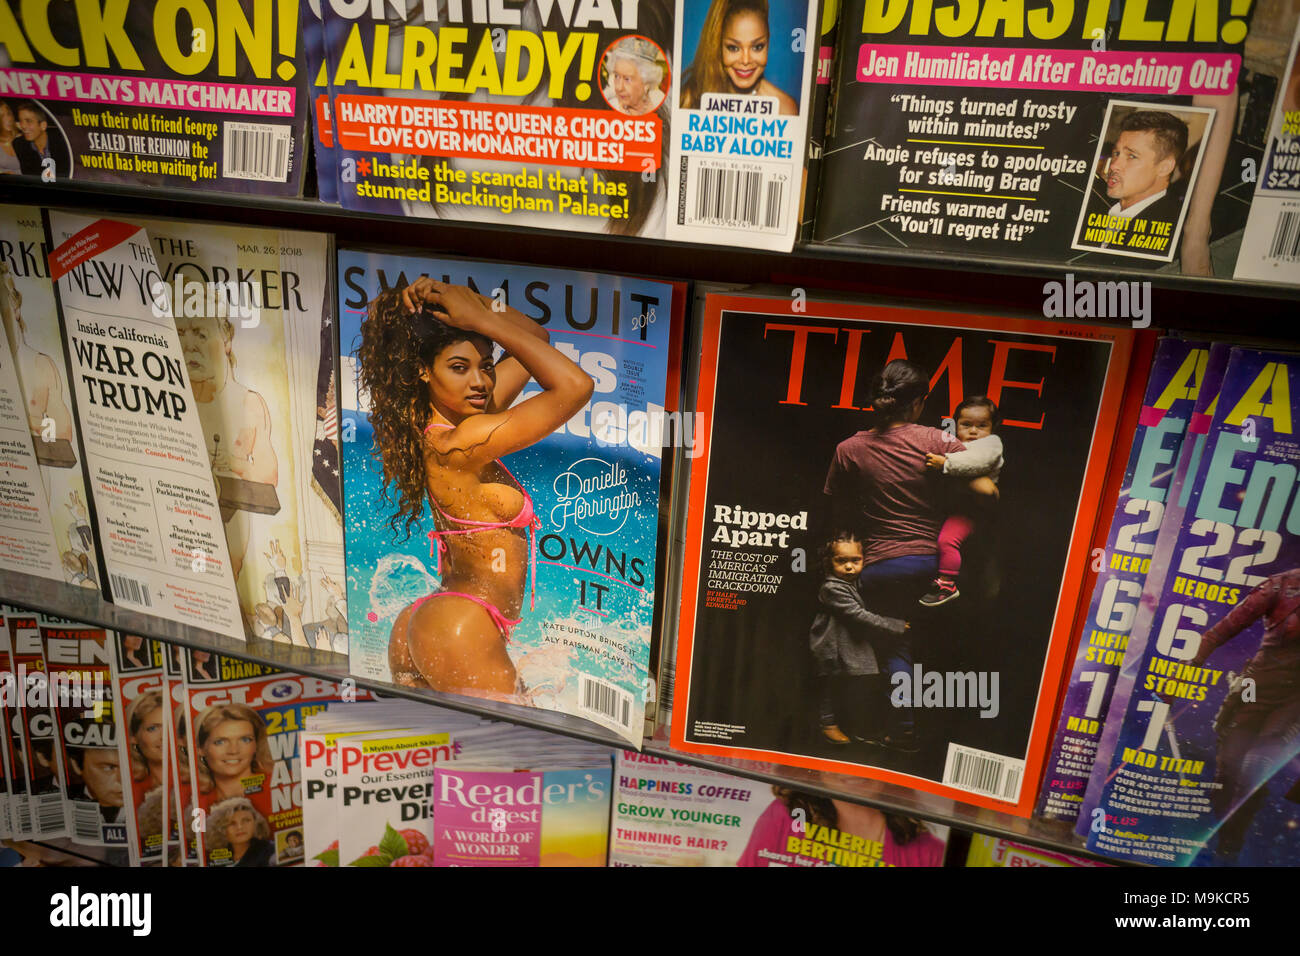 Time and sports Illustrated magazines are seen along with other periodicals on a newsstand in New York on Thursday, March 22, 2018. Meredith Corp., which purchased Time Inc. announced it is considering selling the non-lifestyle brands it picked up in the acquisition, including the flagship Time, Sports Illustrated, Money and Fortune. Meredith acquired Time in January 2018. (Â© Richard B. Levine) Stock Photo